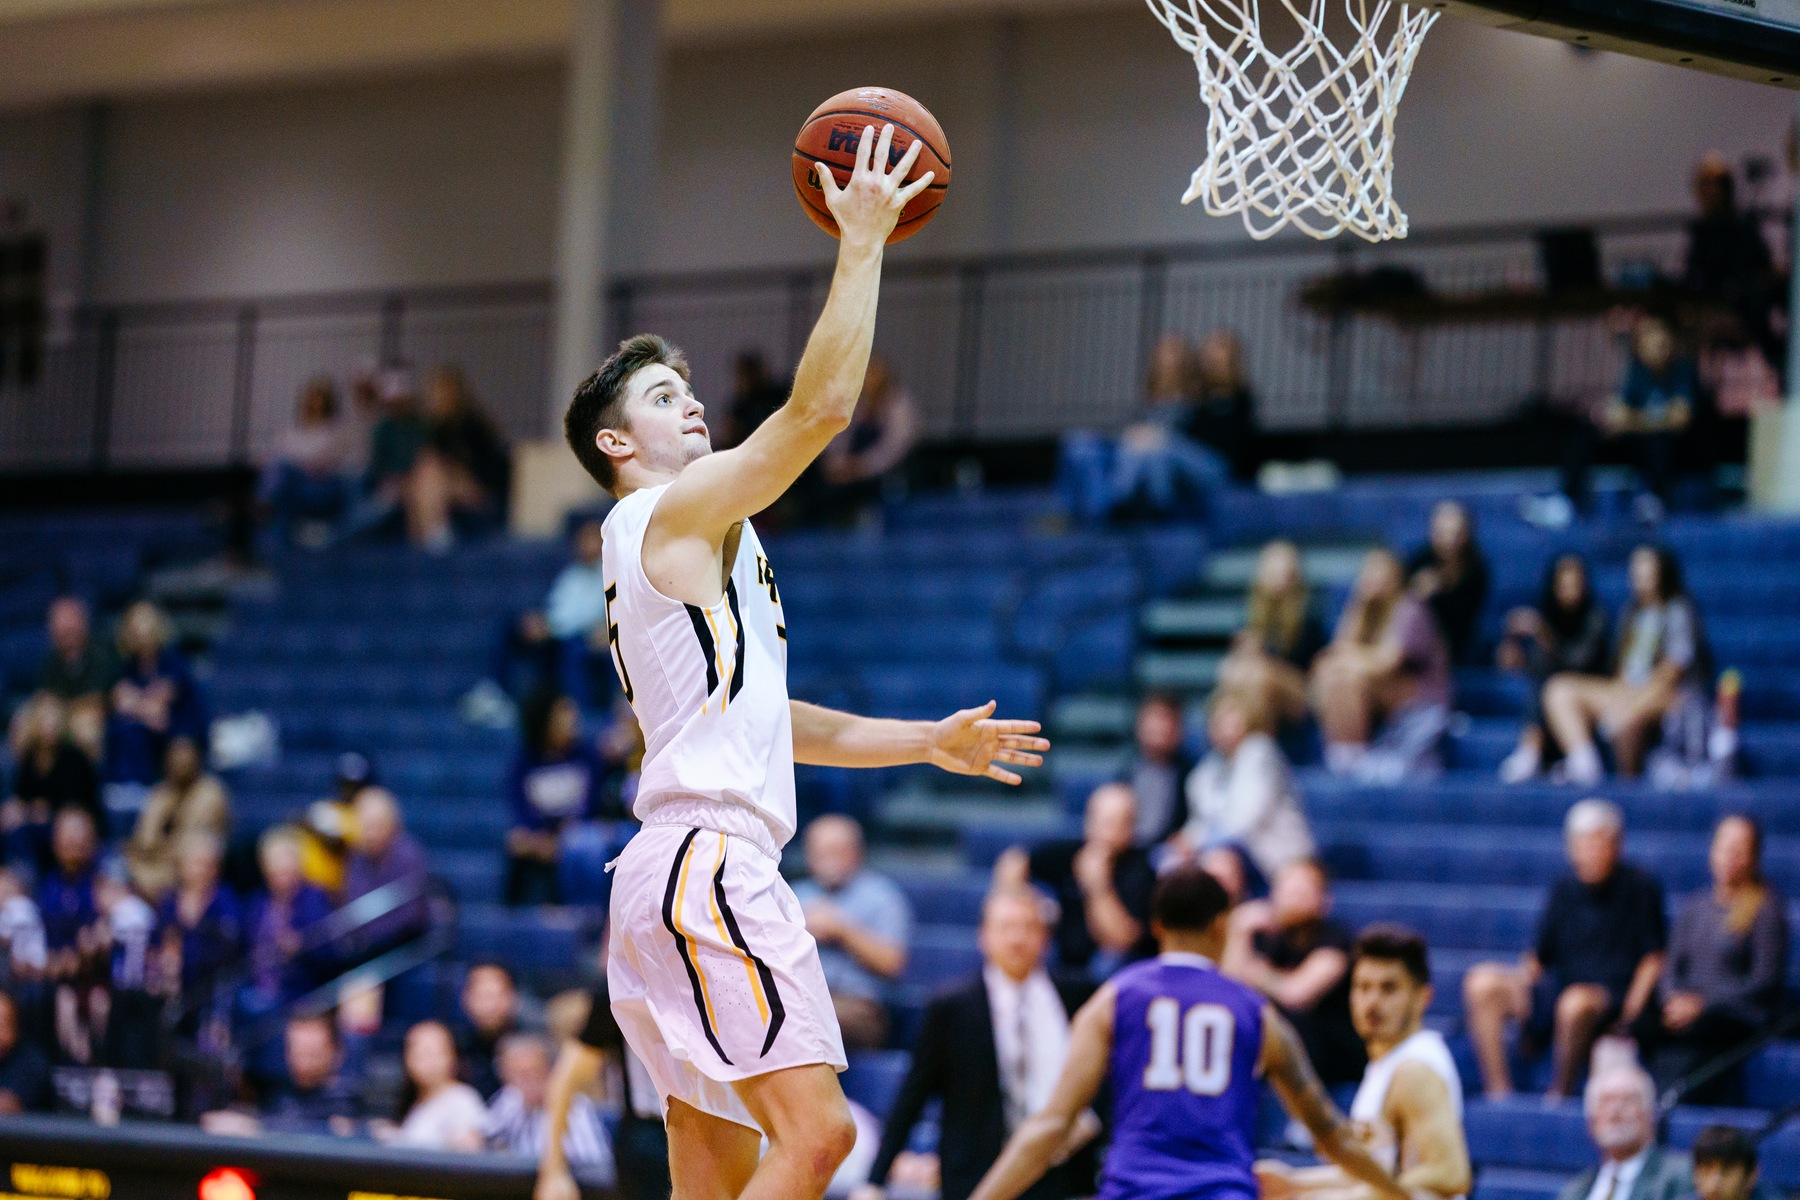 Kyle Howard's Game-Winning Shot Lifts Southwestern Over Colorado College